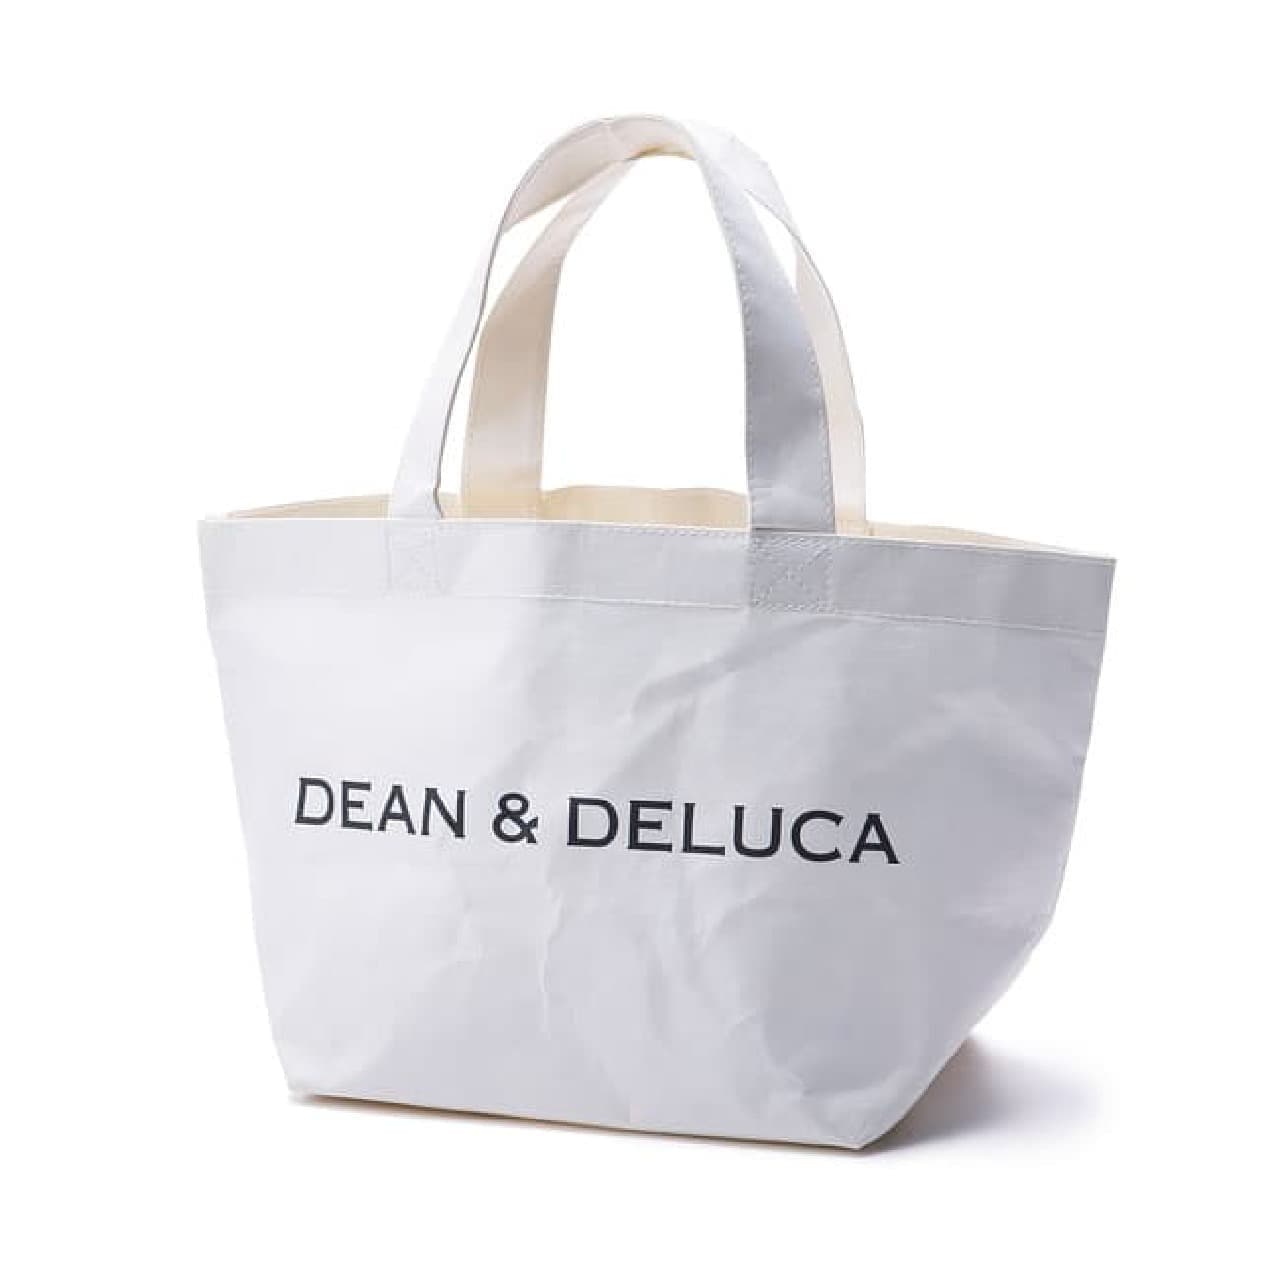 DEAN & DELUCA Lucky bag 2022 --Three kinds of coffee goods assortment! Comes in a paper package that becomes a sub-bag